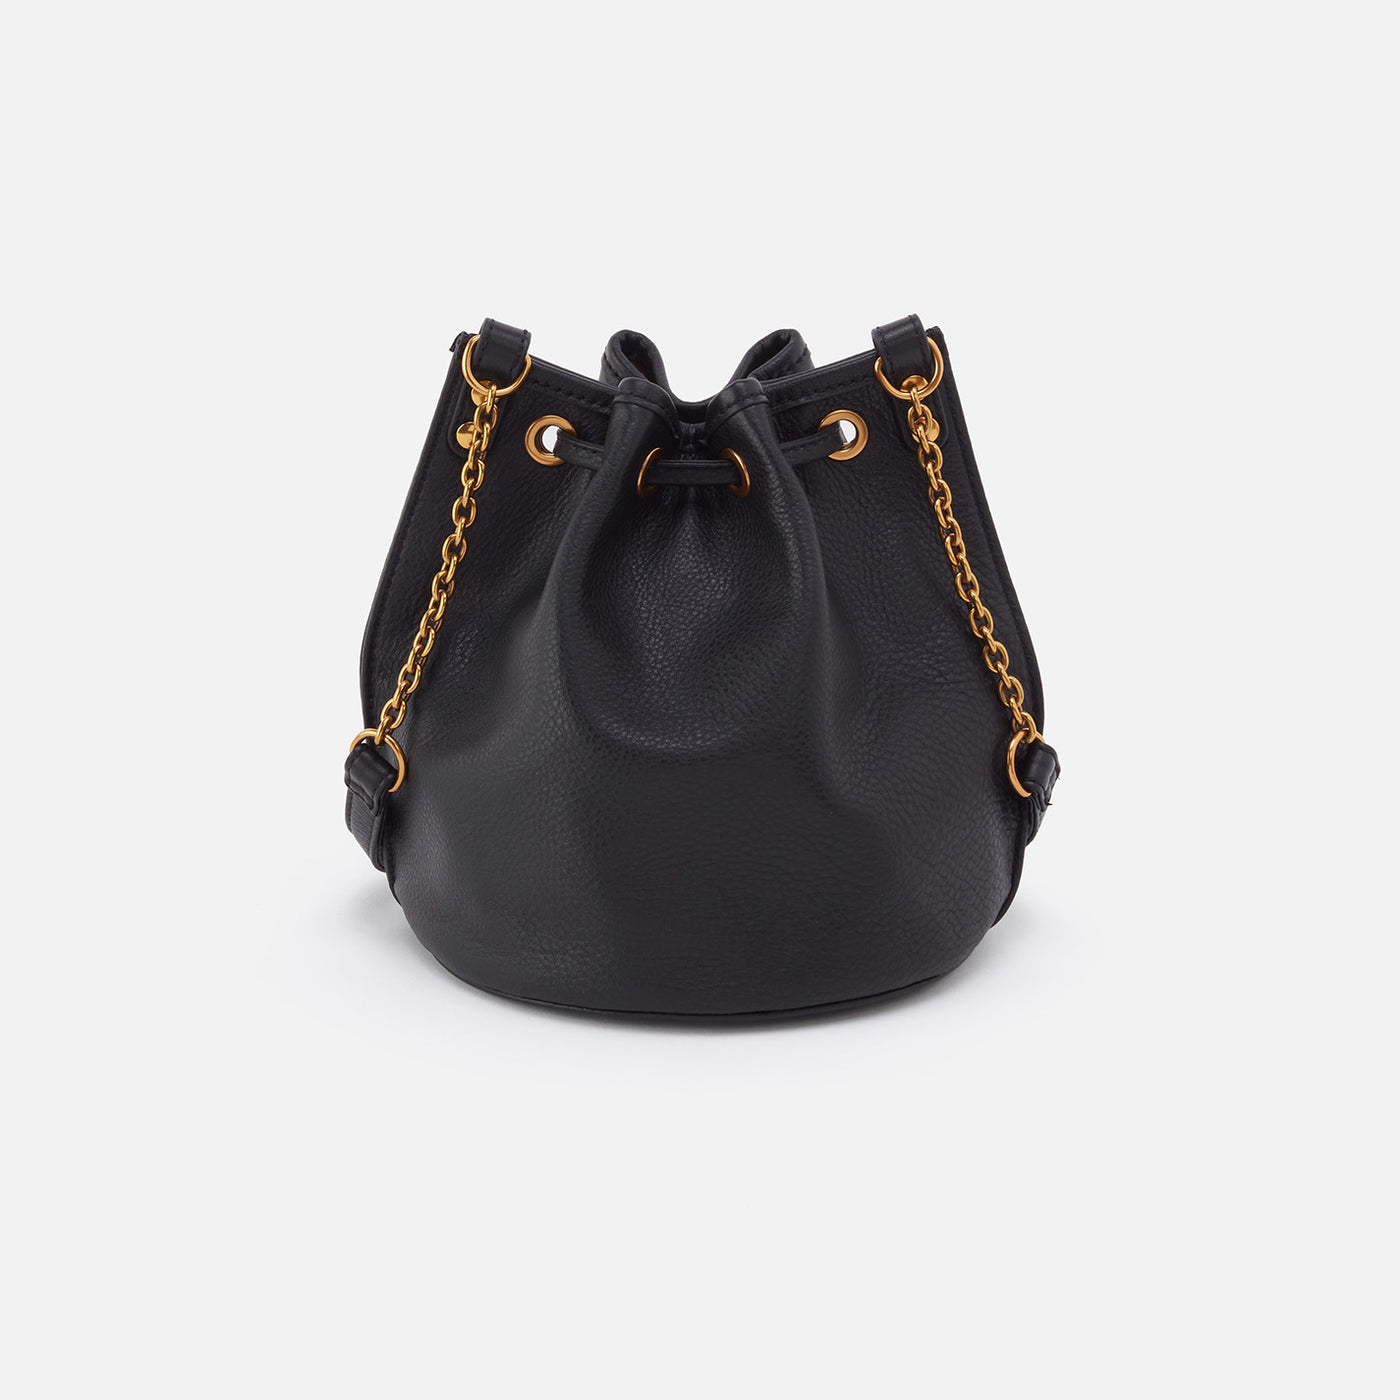 Small bucket bag in pebbled patent leather